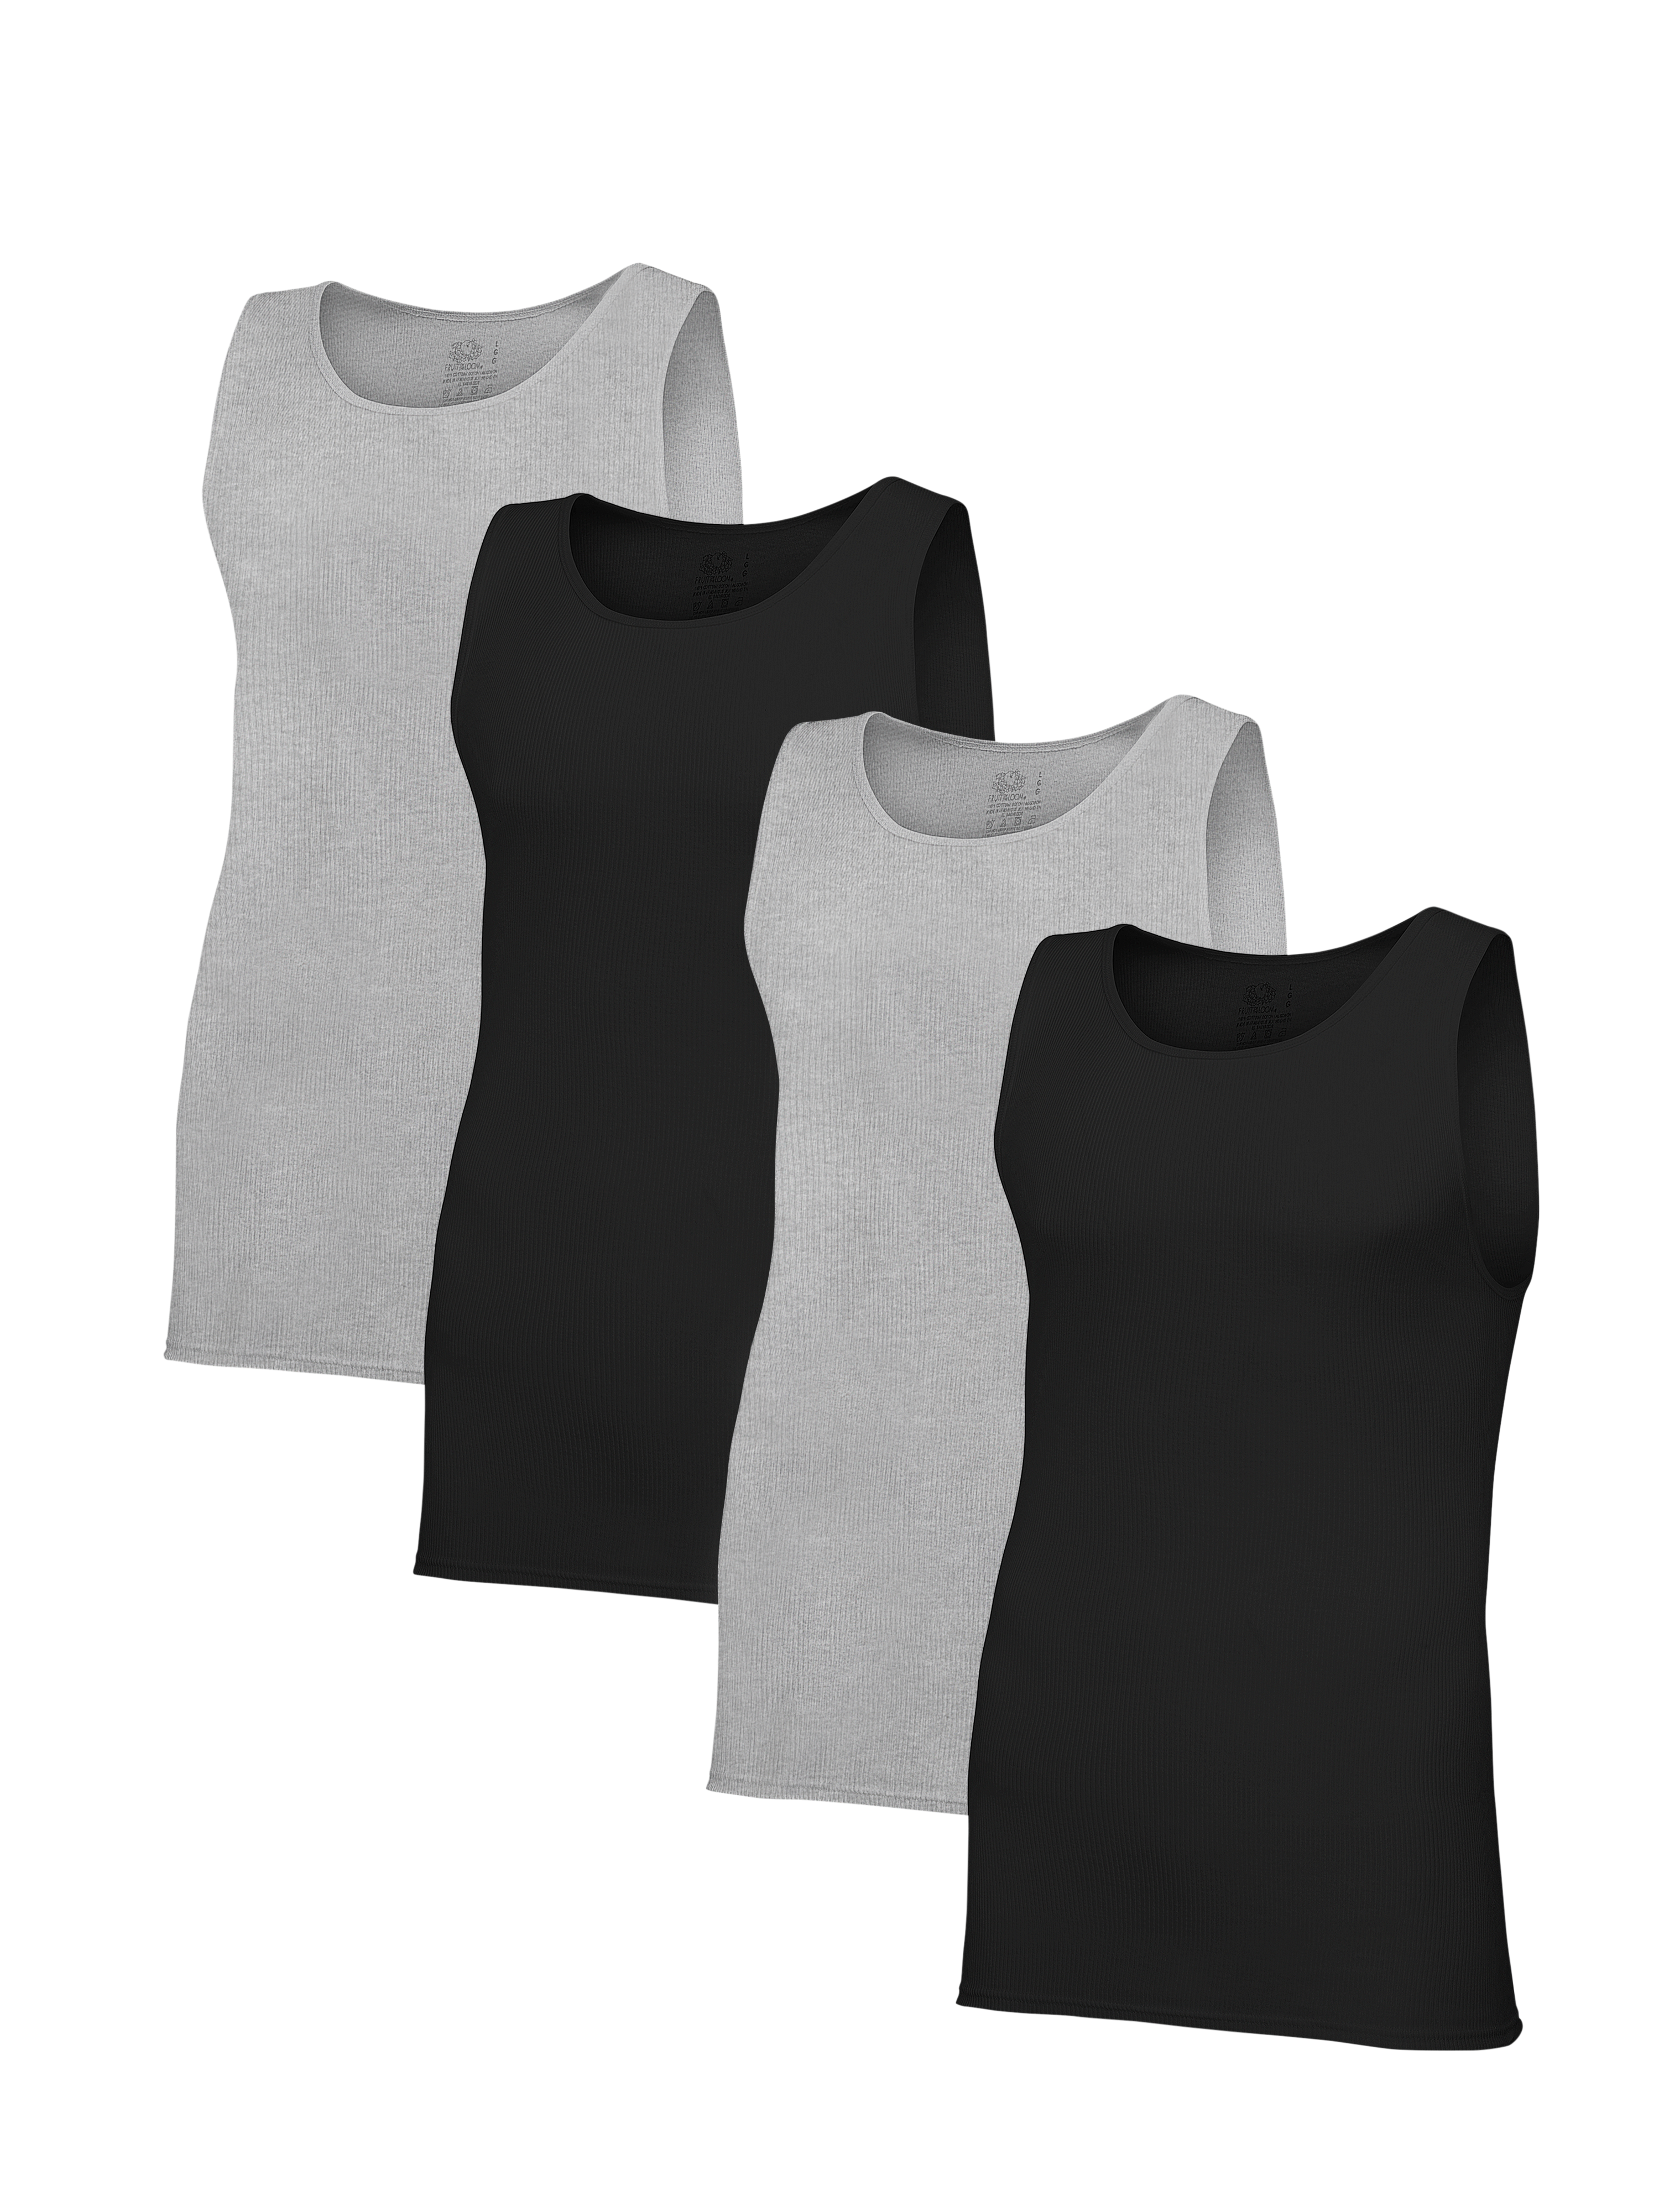 Fruit of the Loom Men's Premium A-Shirt, Black and Gray 4 Pack